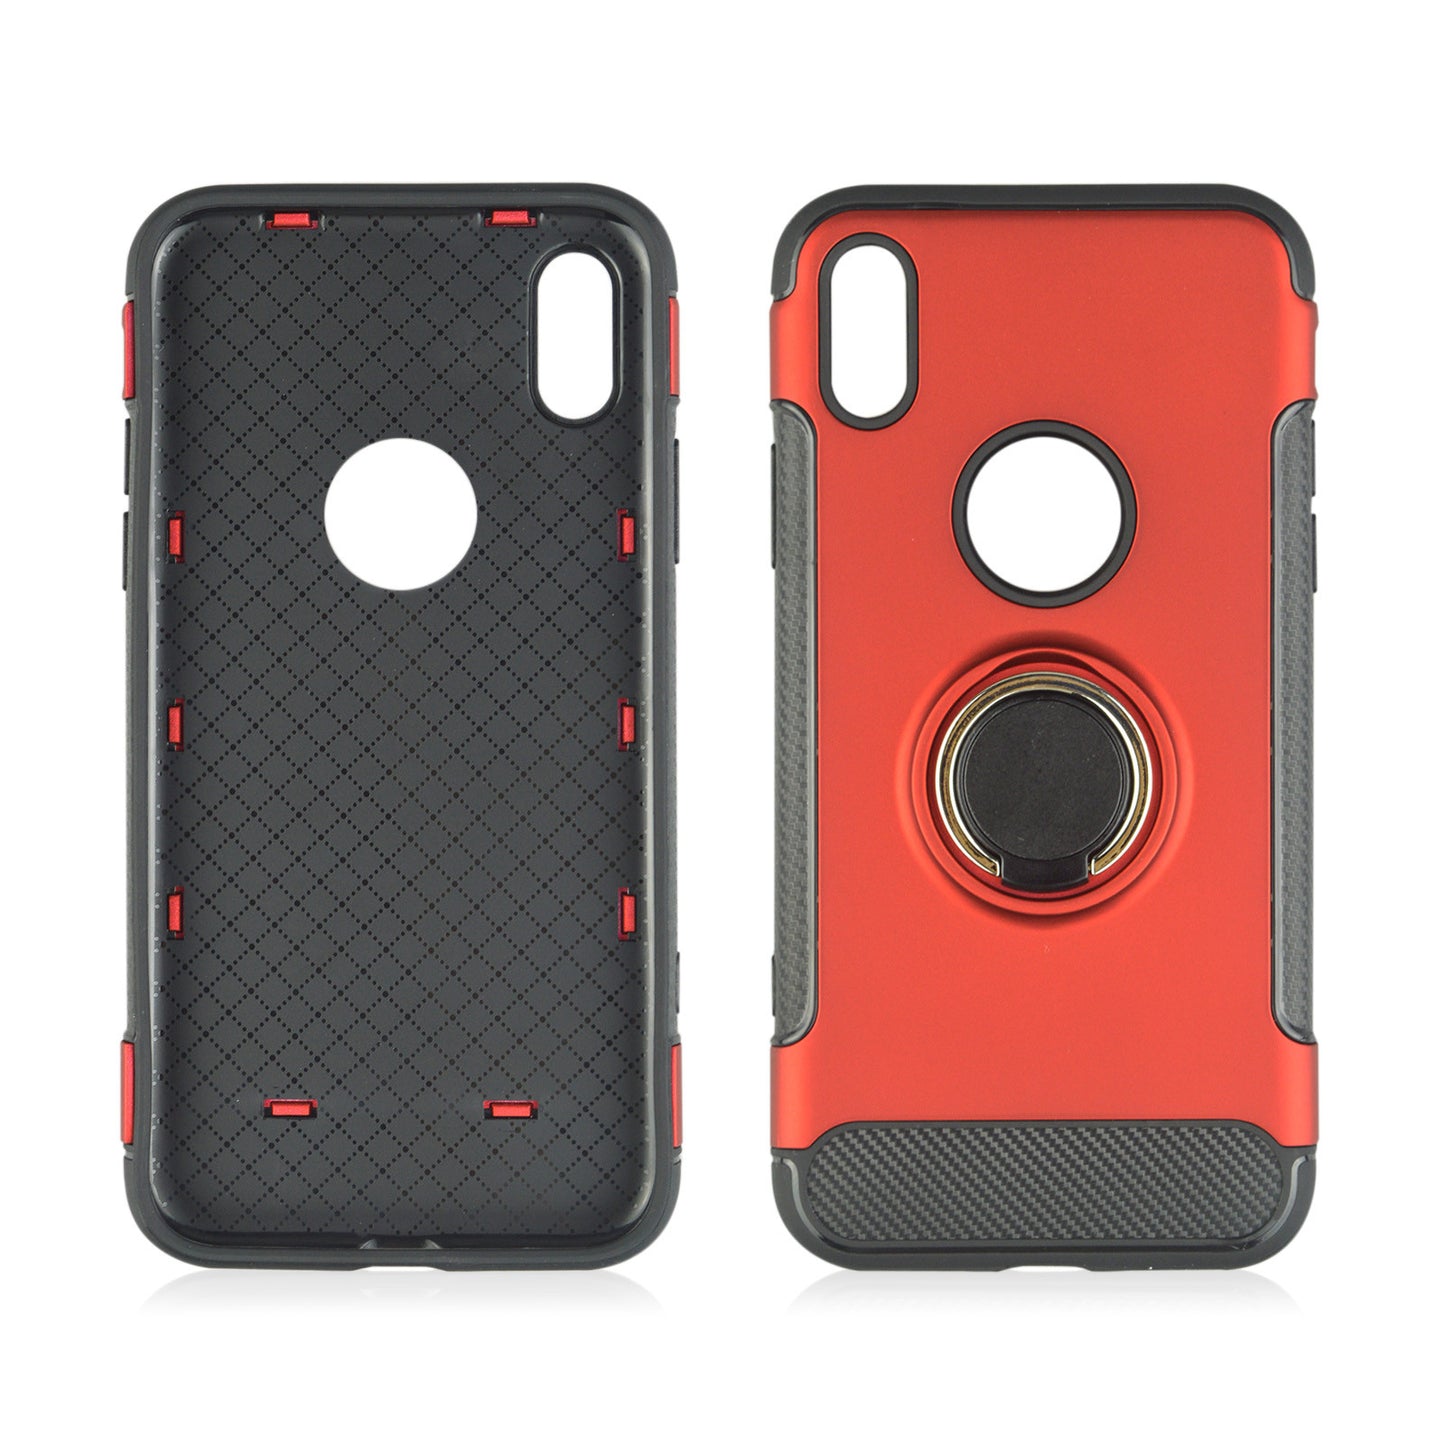 Shockproof Hard PC Phone Cover 360 Rotate Ring Holder Phone Back Case for IPhone X 8 7 6S 6 Plus